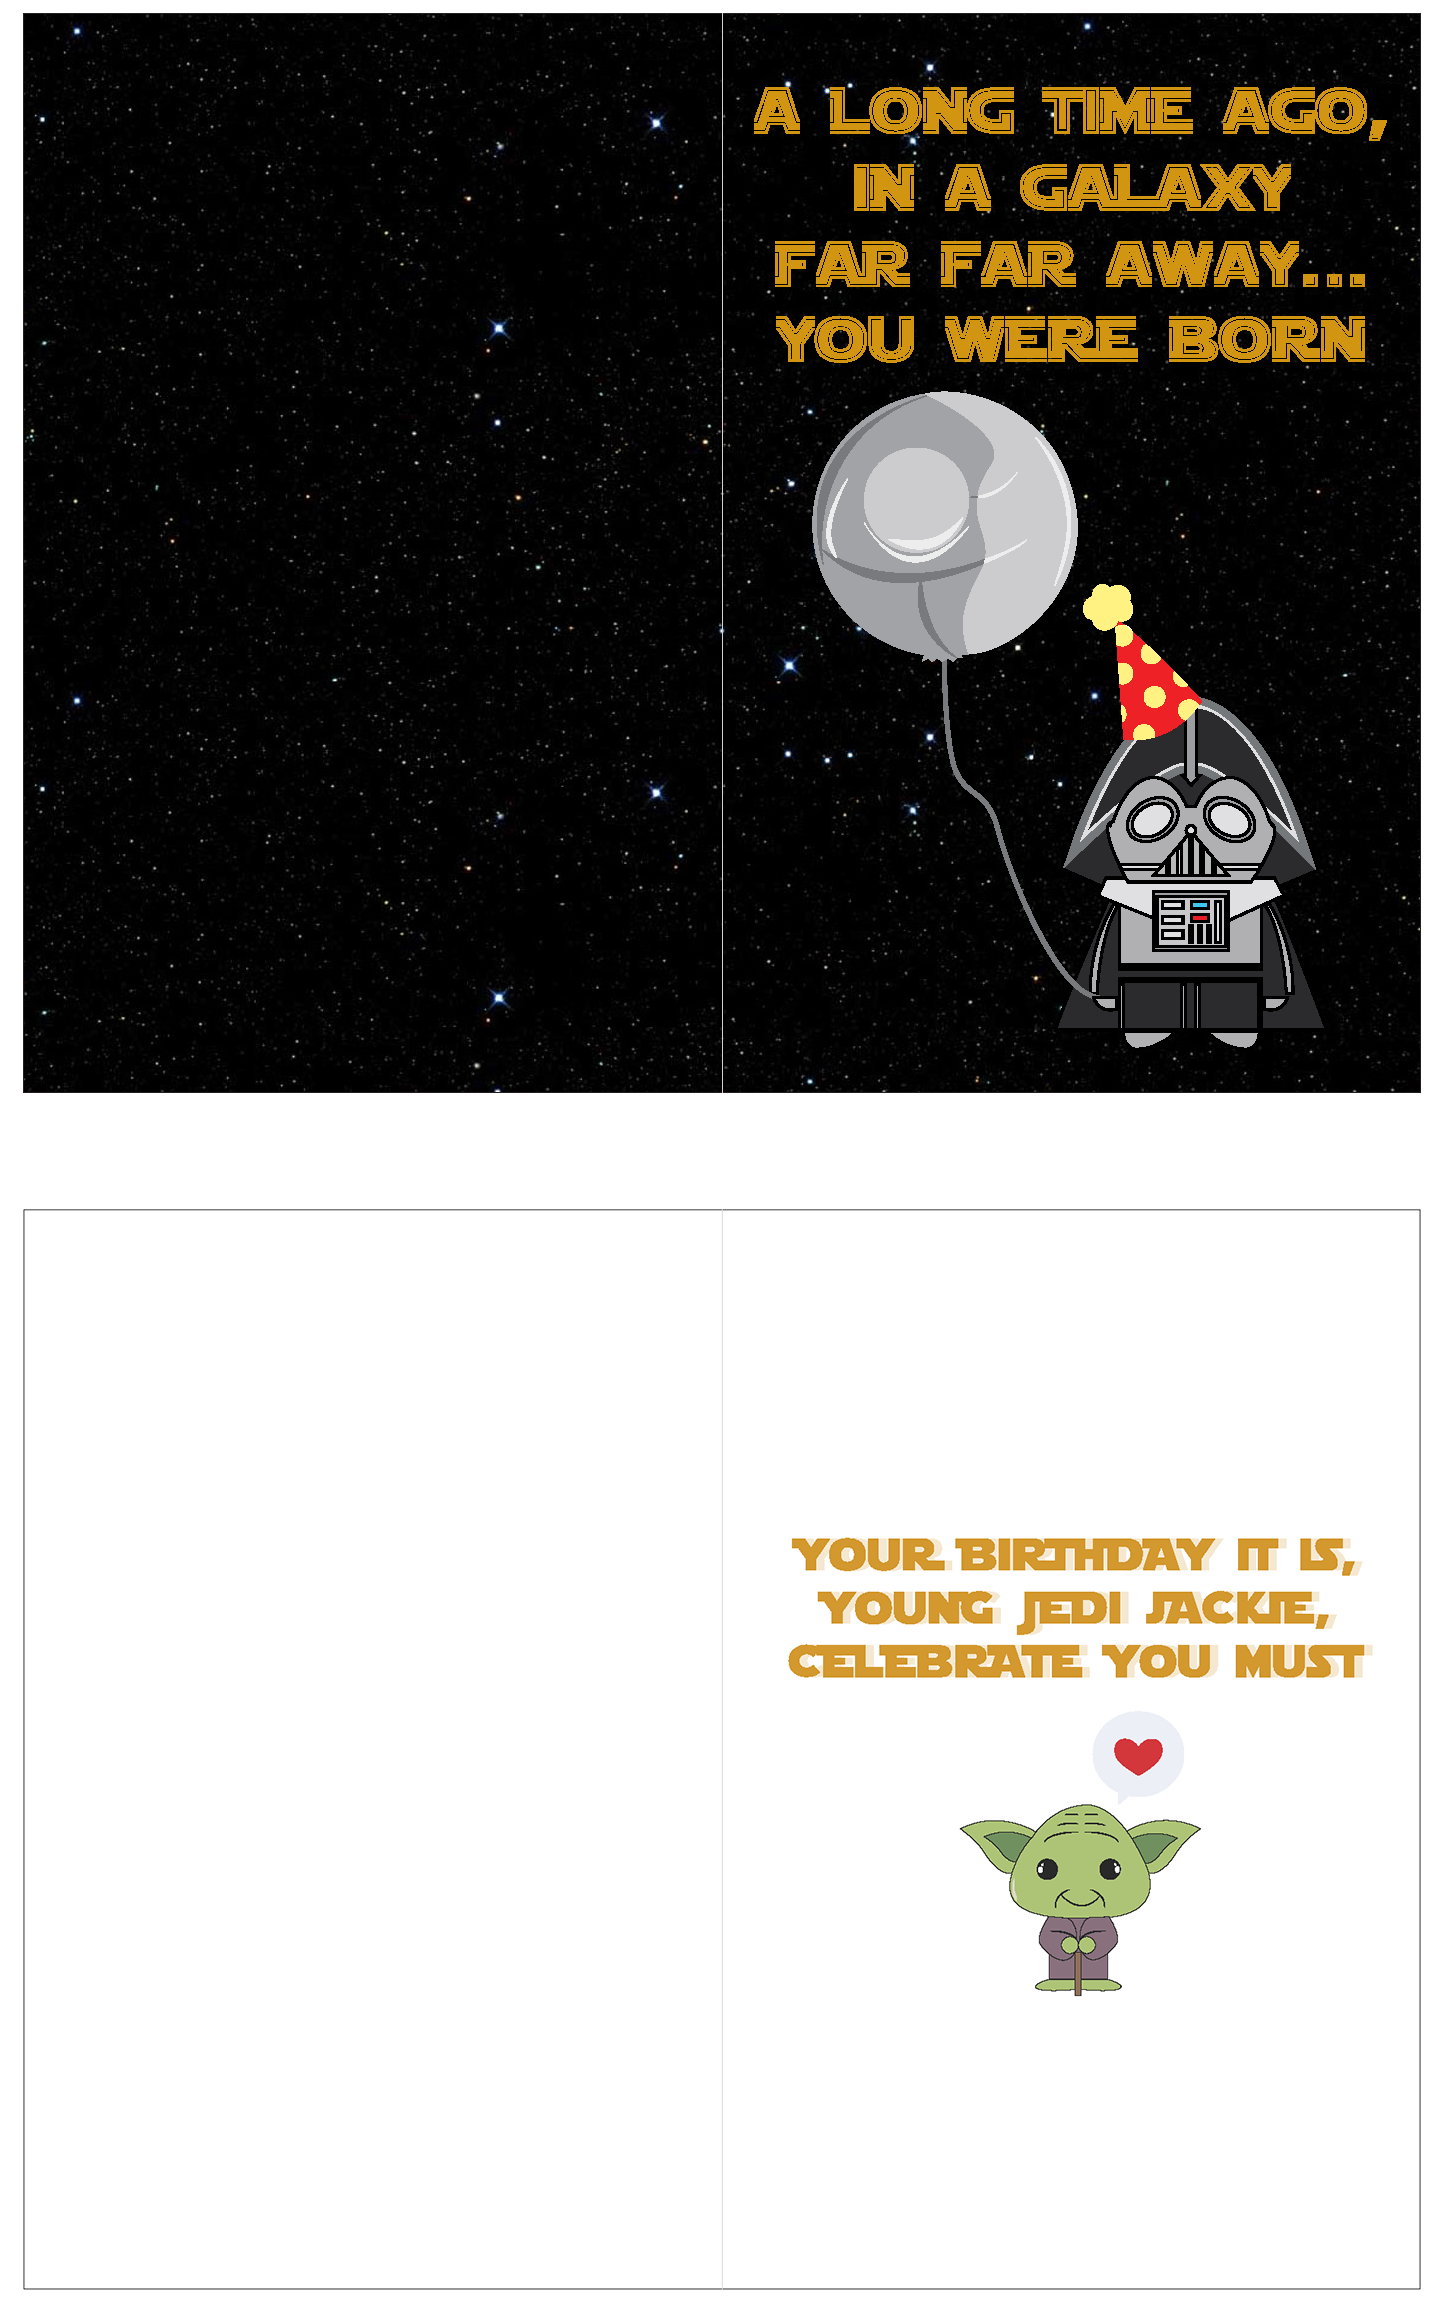 starwars bday card_Page_1.png